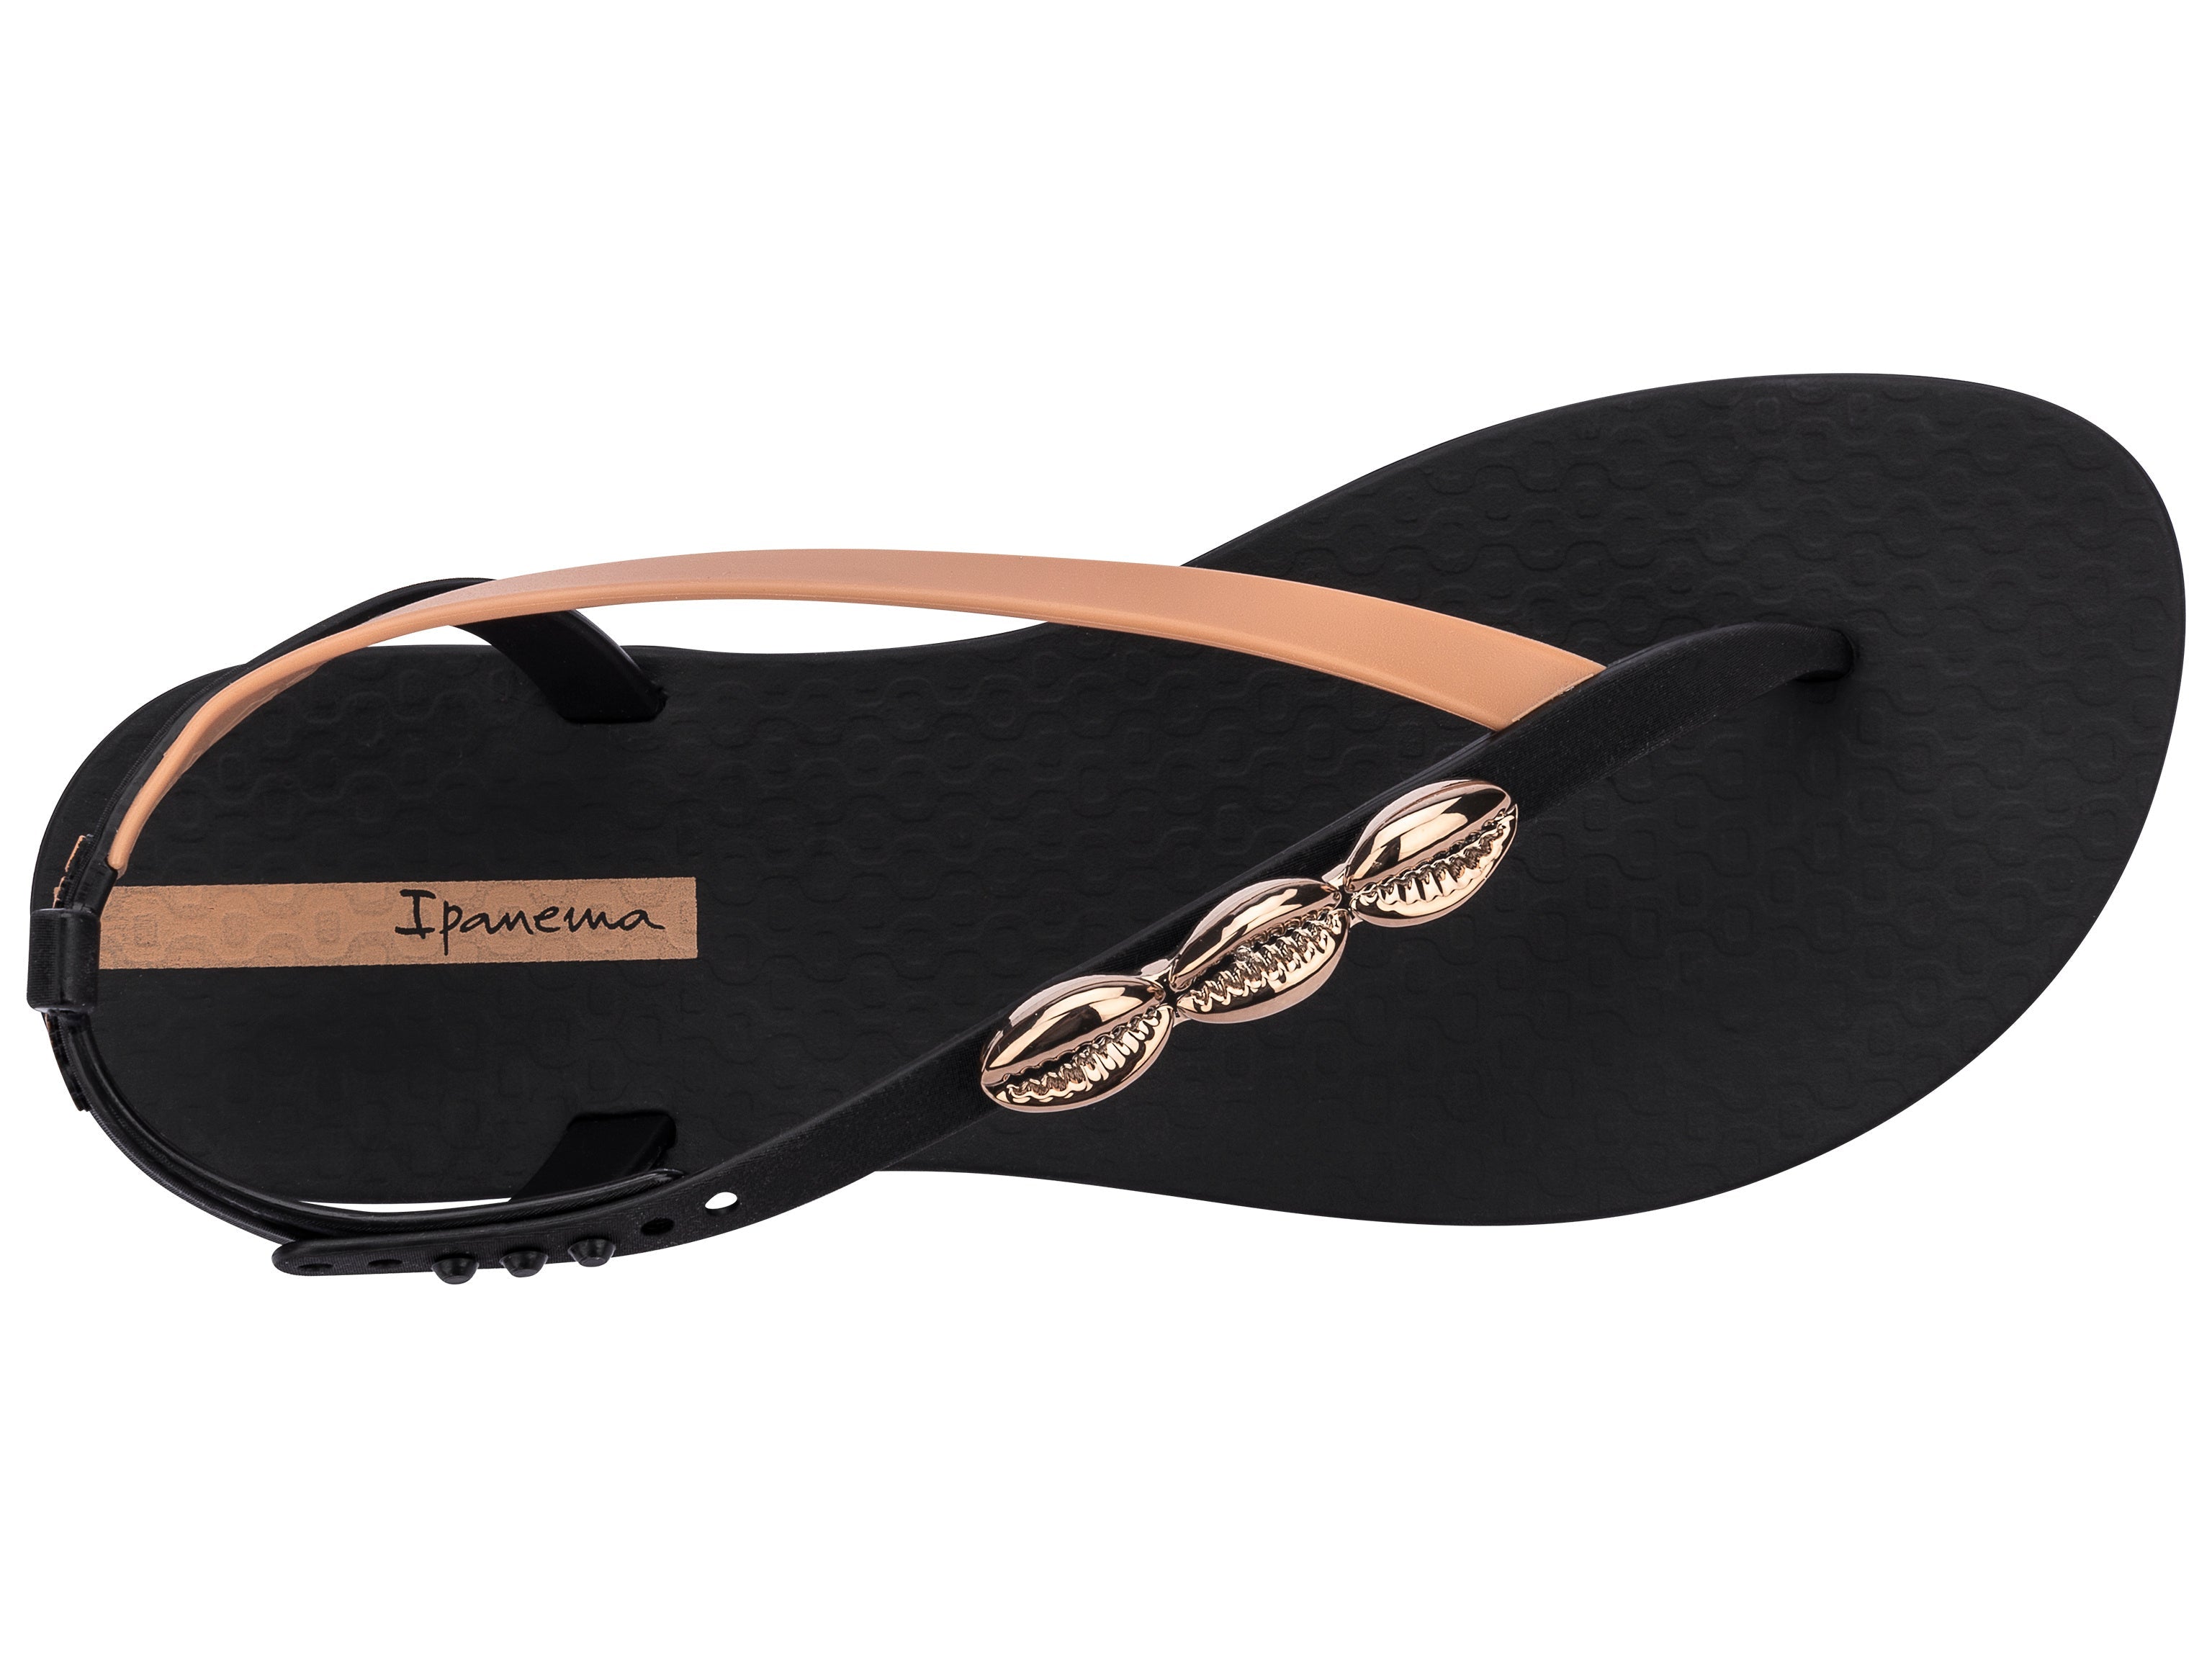 Top view of a black Ipanema Salty women's sandal with 3 gold shells on the strap.